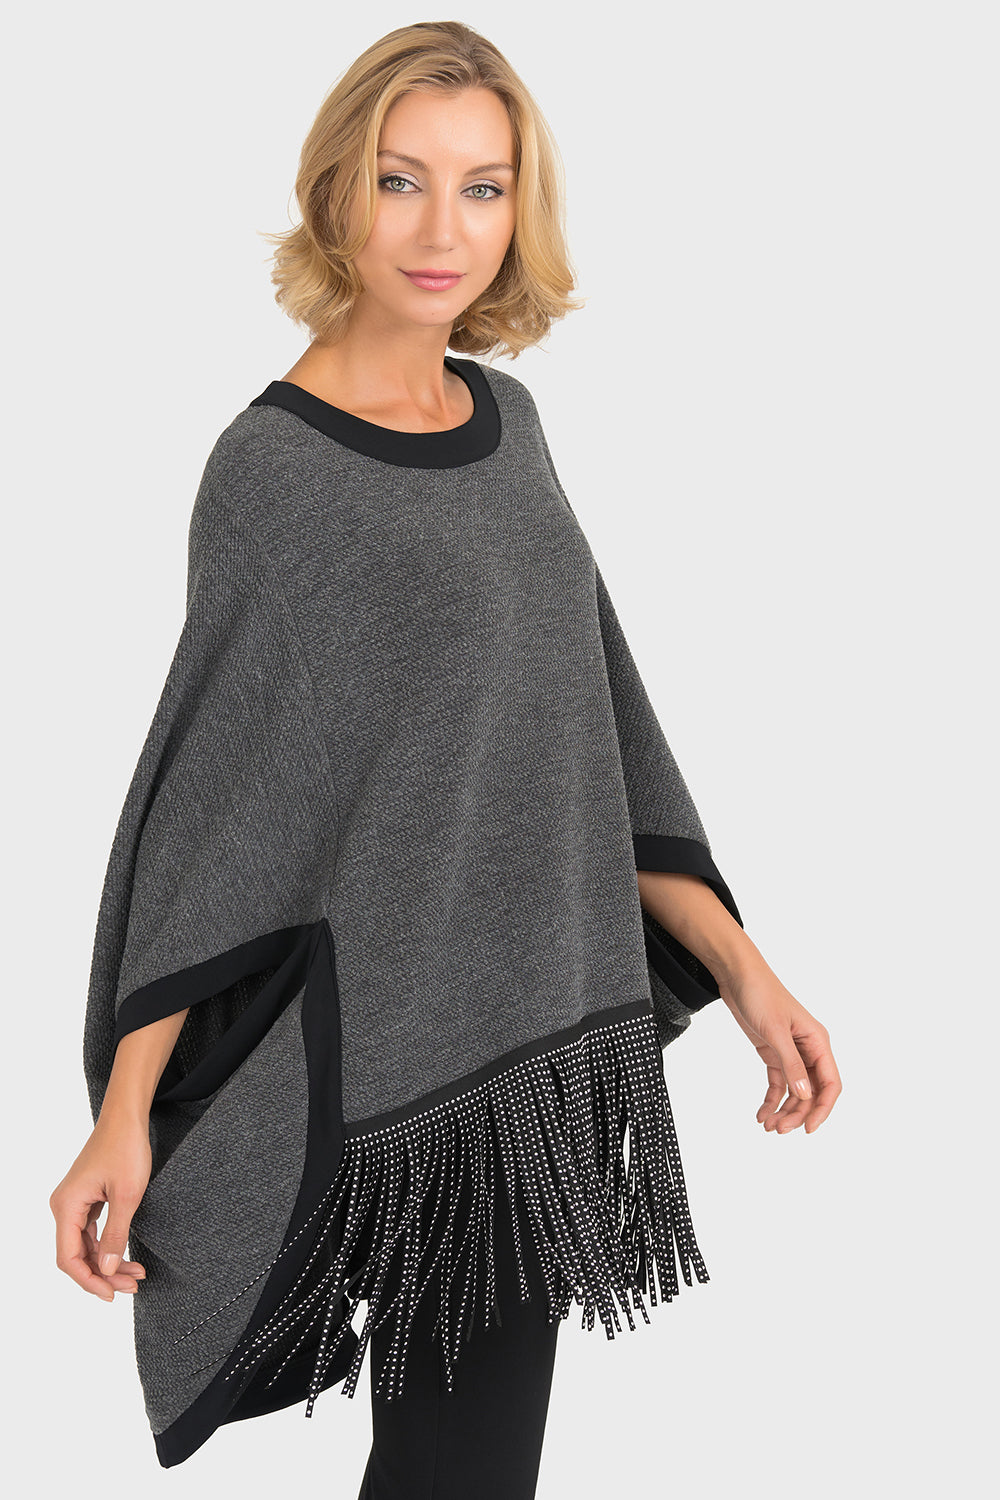 Joseph Ribkoff Charcoal Cover Up Style 193479